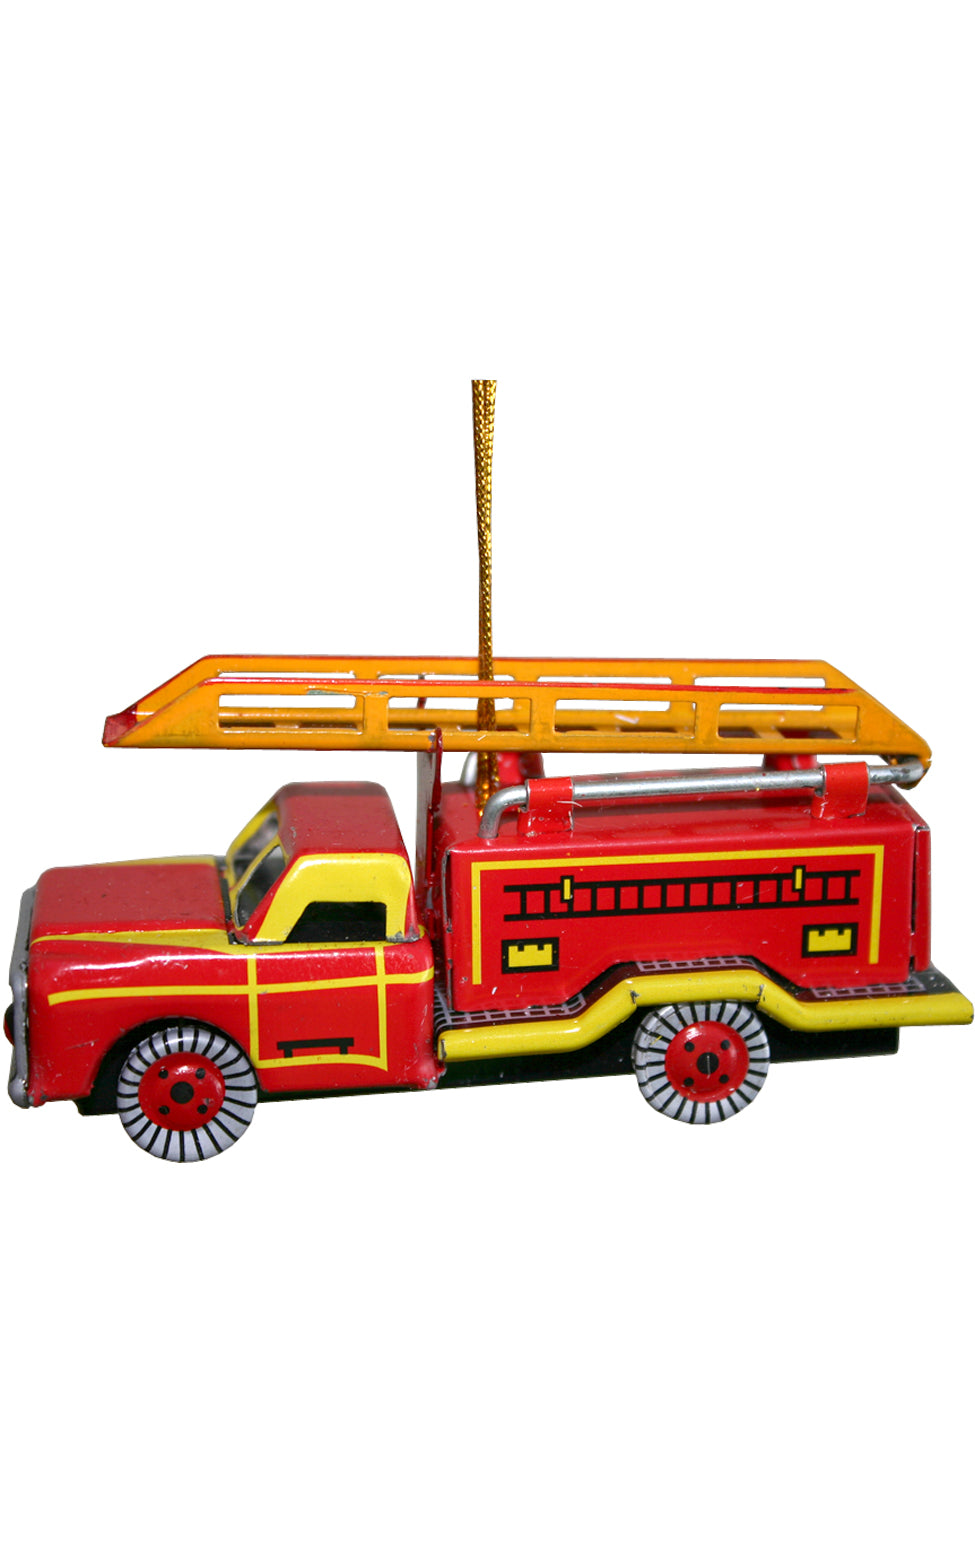 Collectible Tin Ornament - Fire Truck